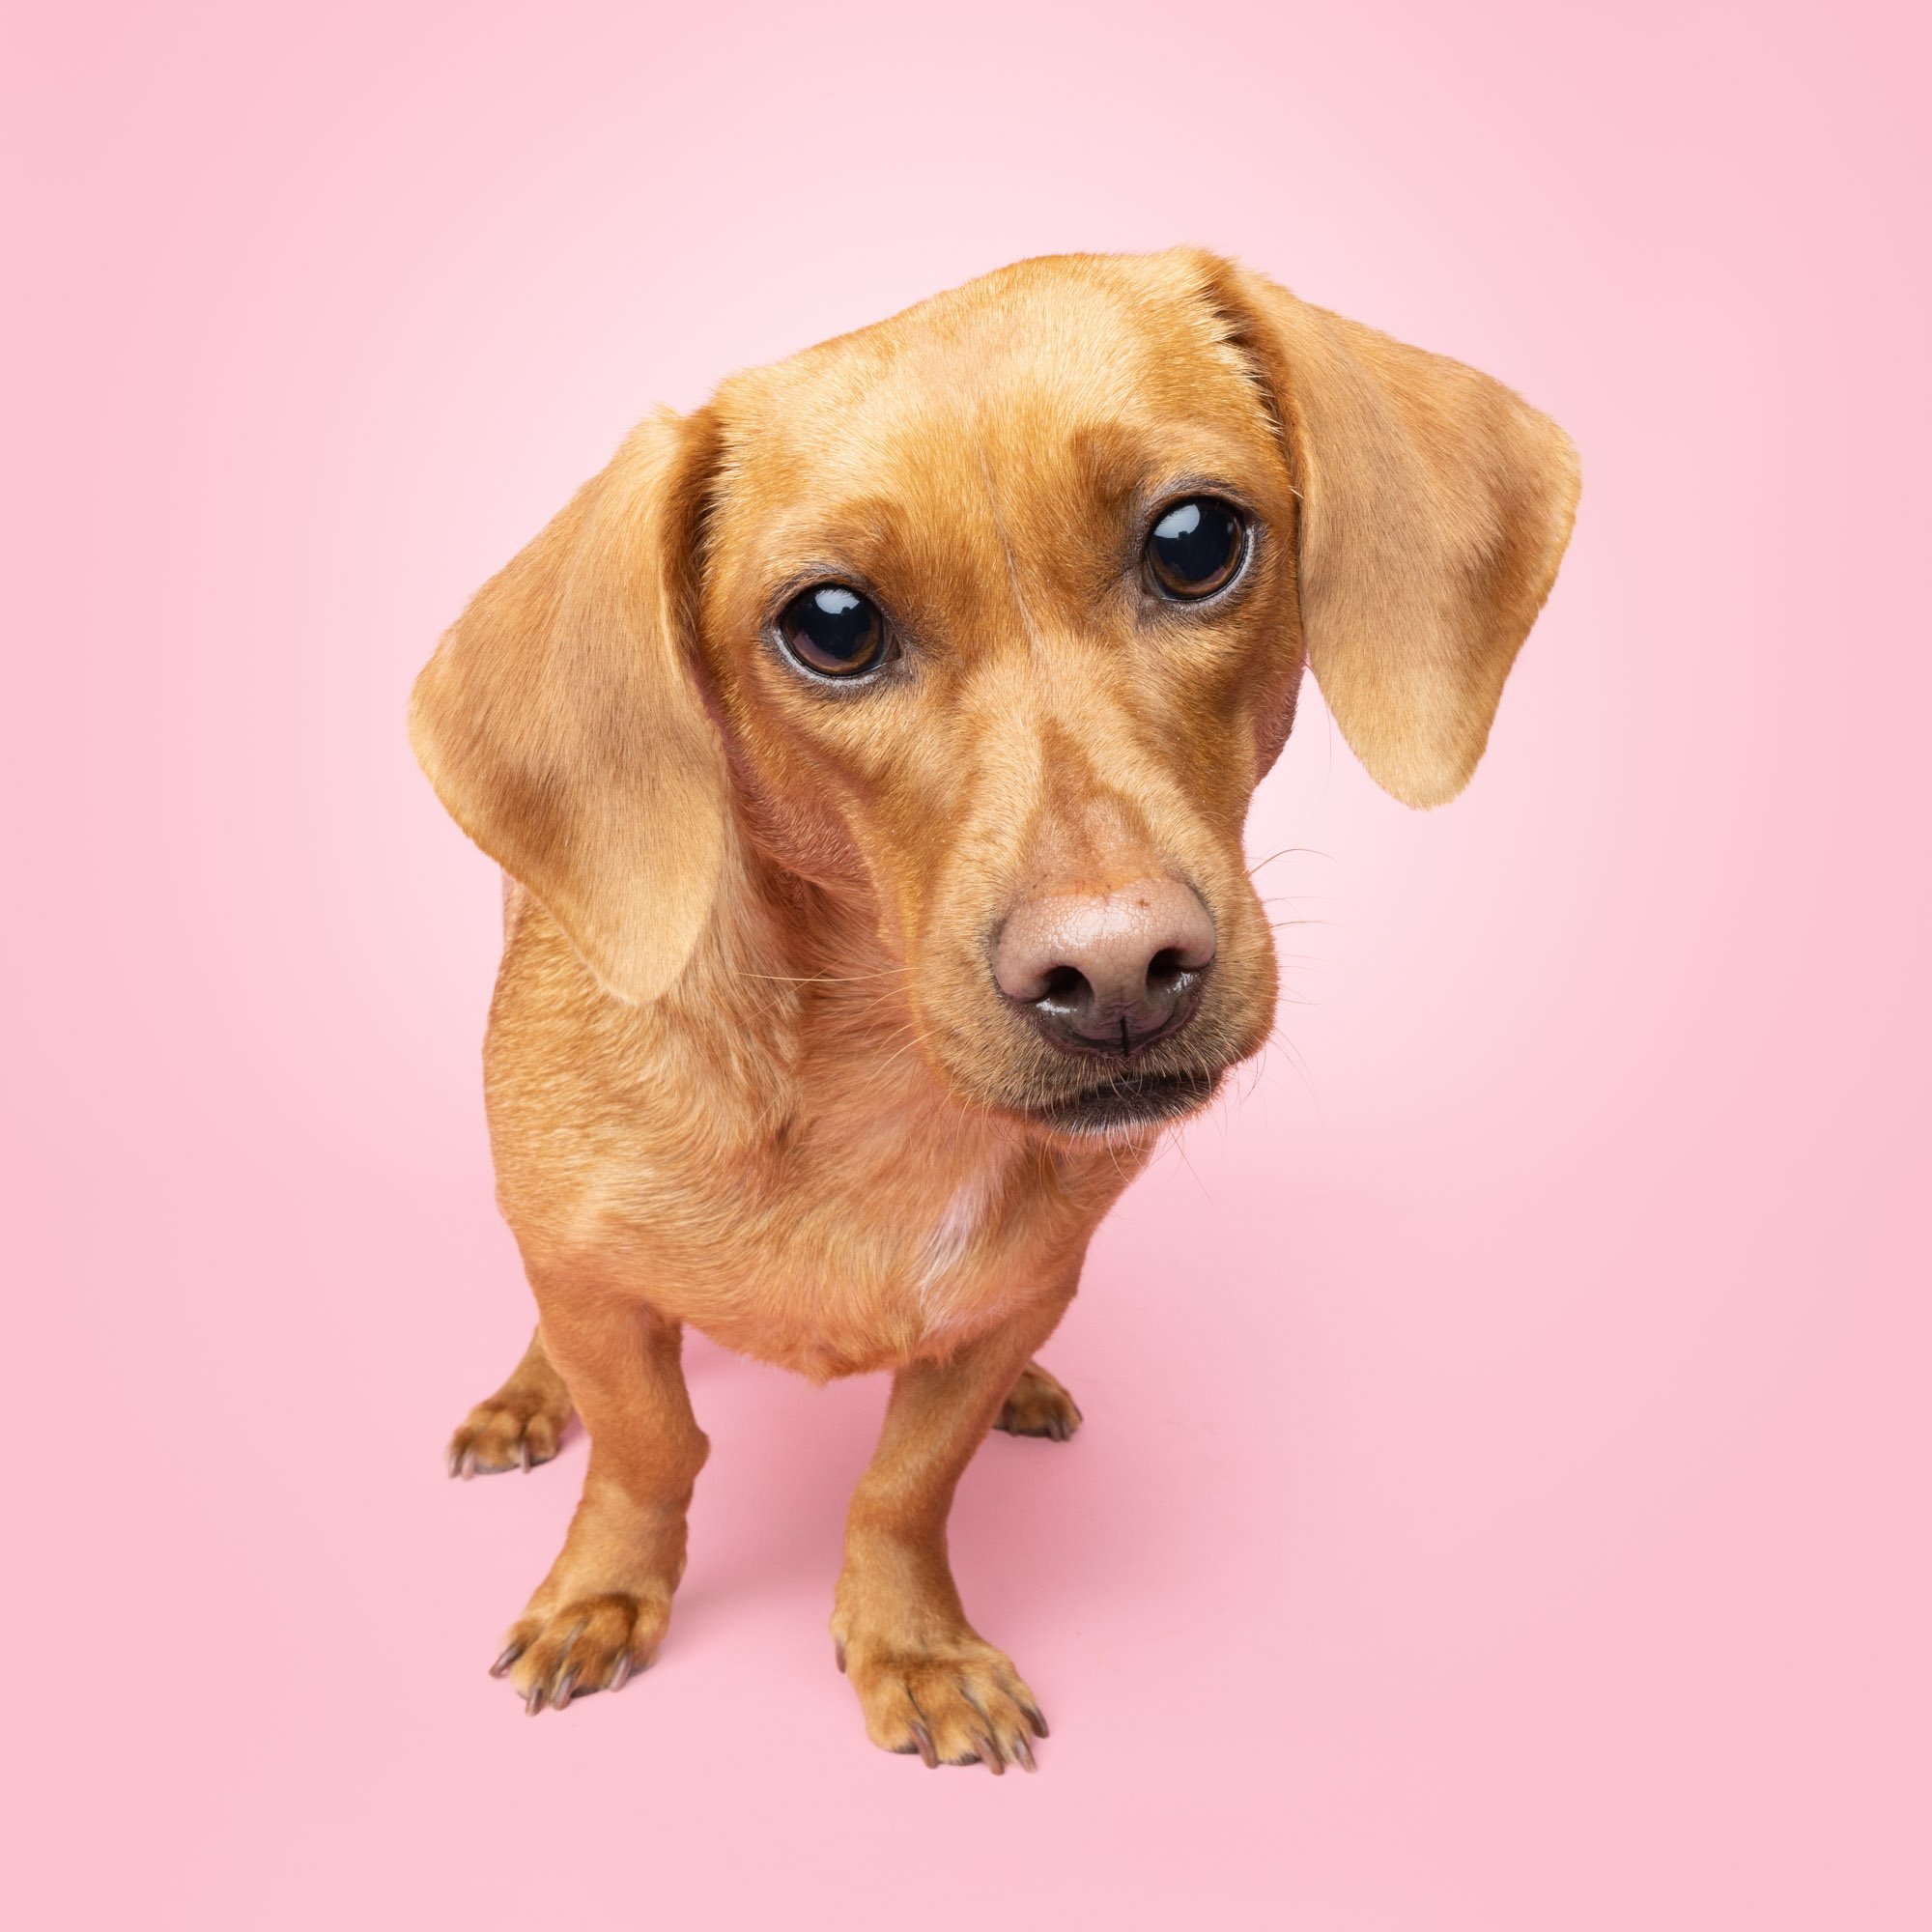 Greg Murray Photography | Pet and Animal Stock Photography | studio portrait of brown dachshund weiner dog against a pink background.jpg